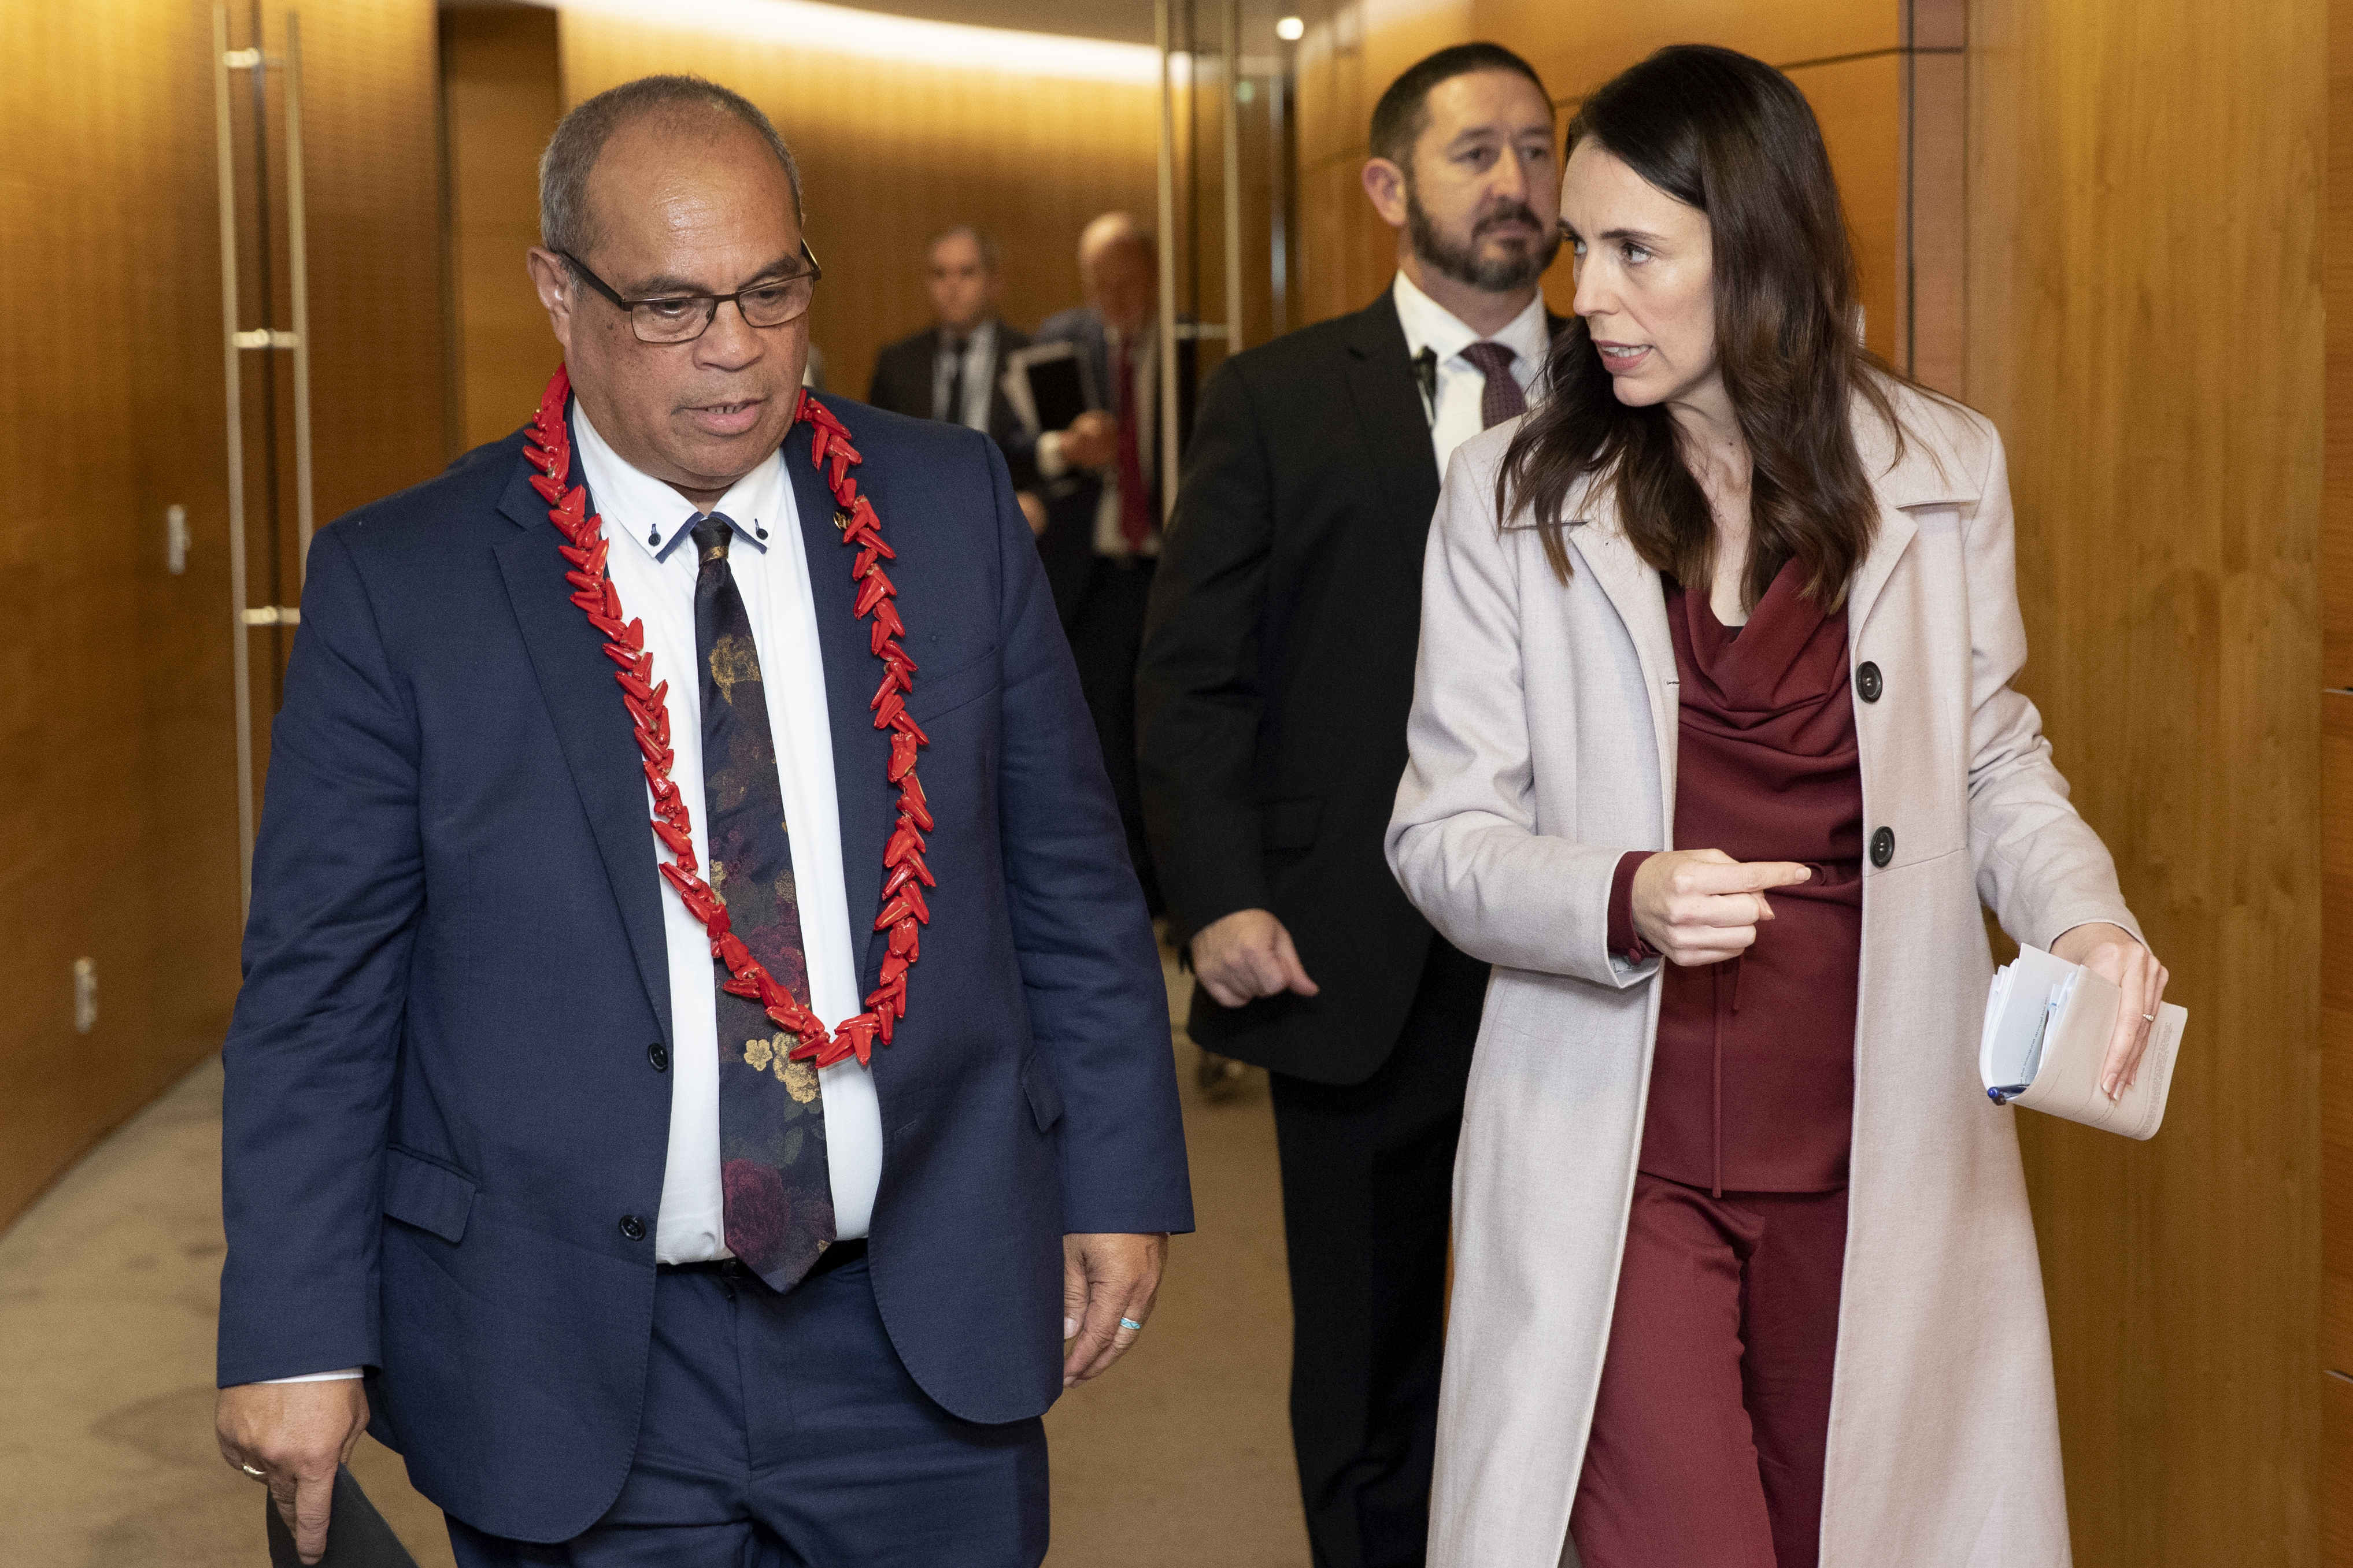 Mr Sio and Ms Ardern